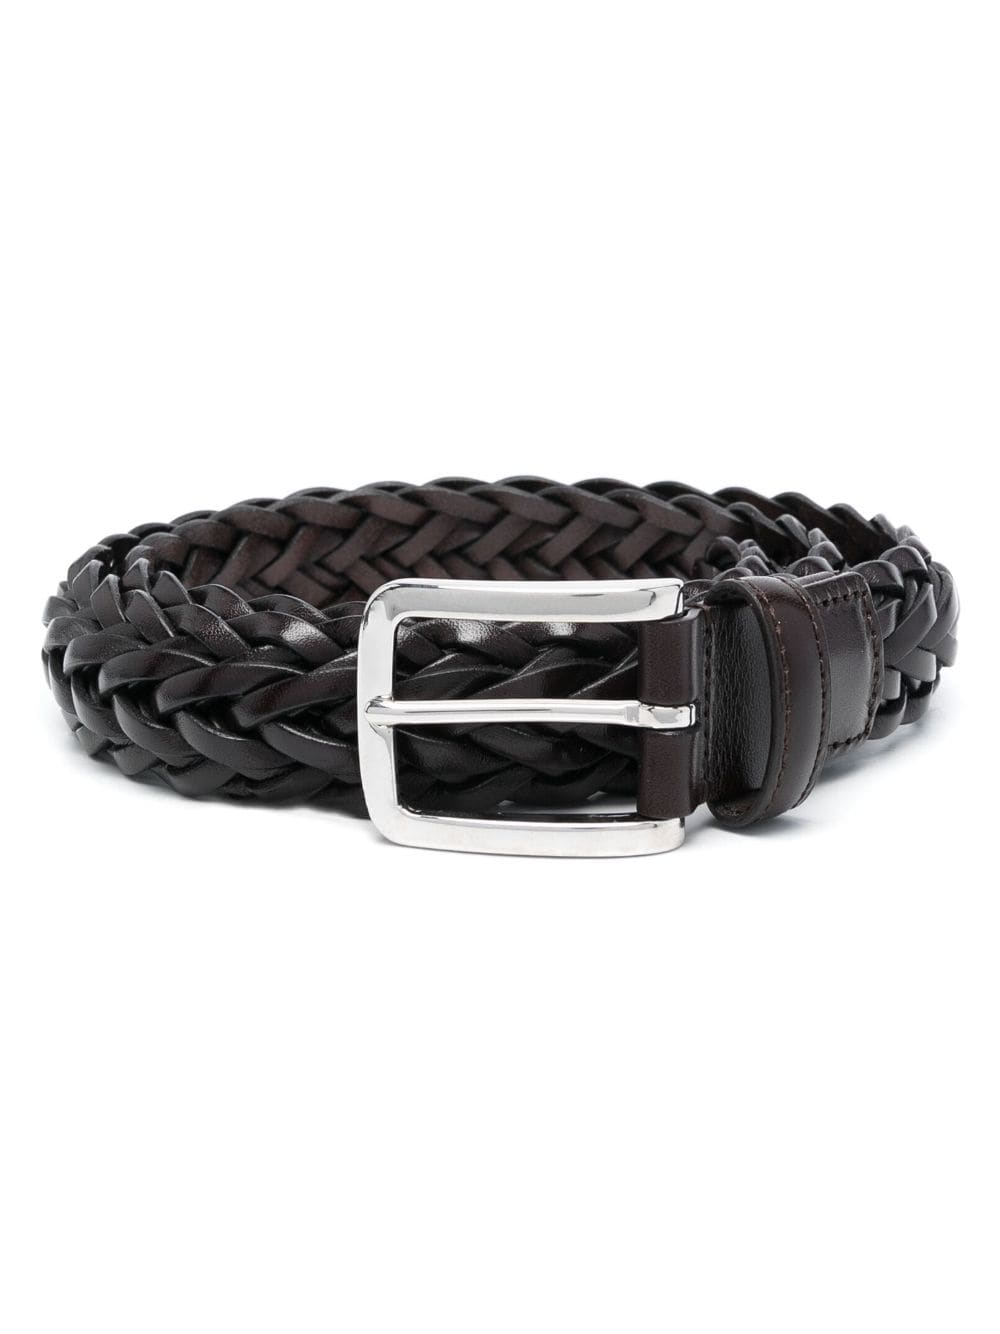 Canali interwoven leather belt - Brown